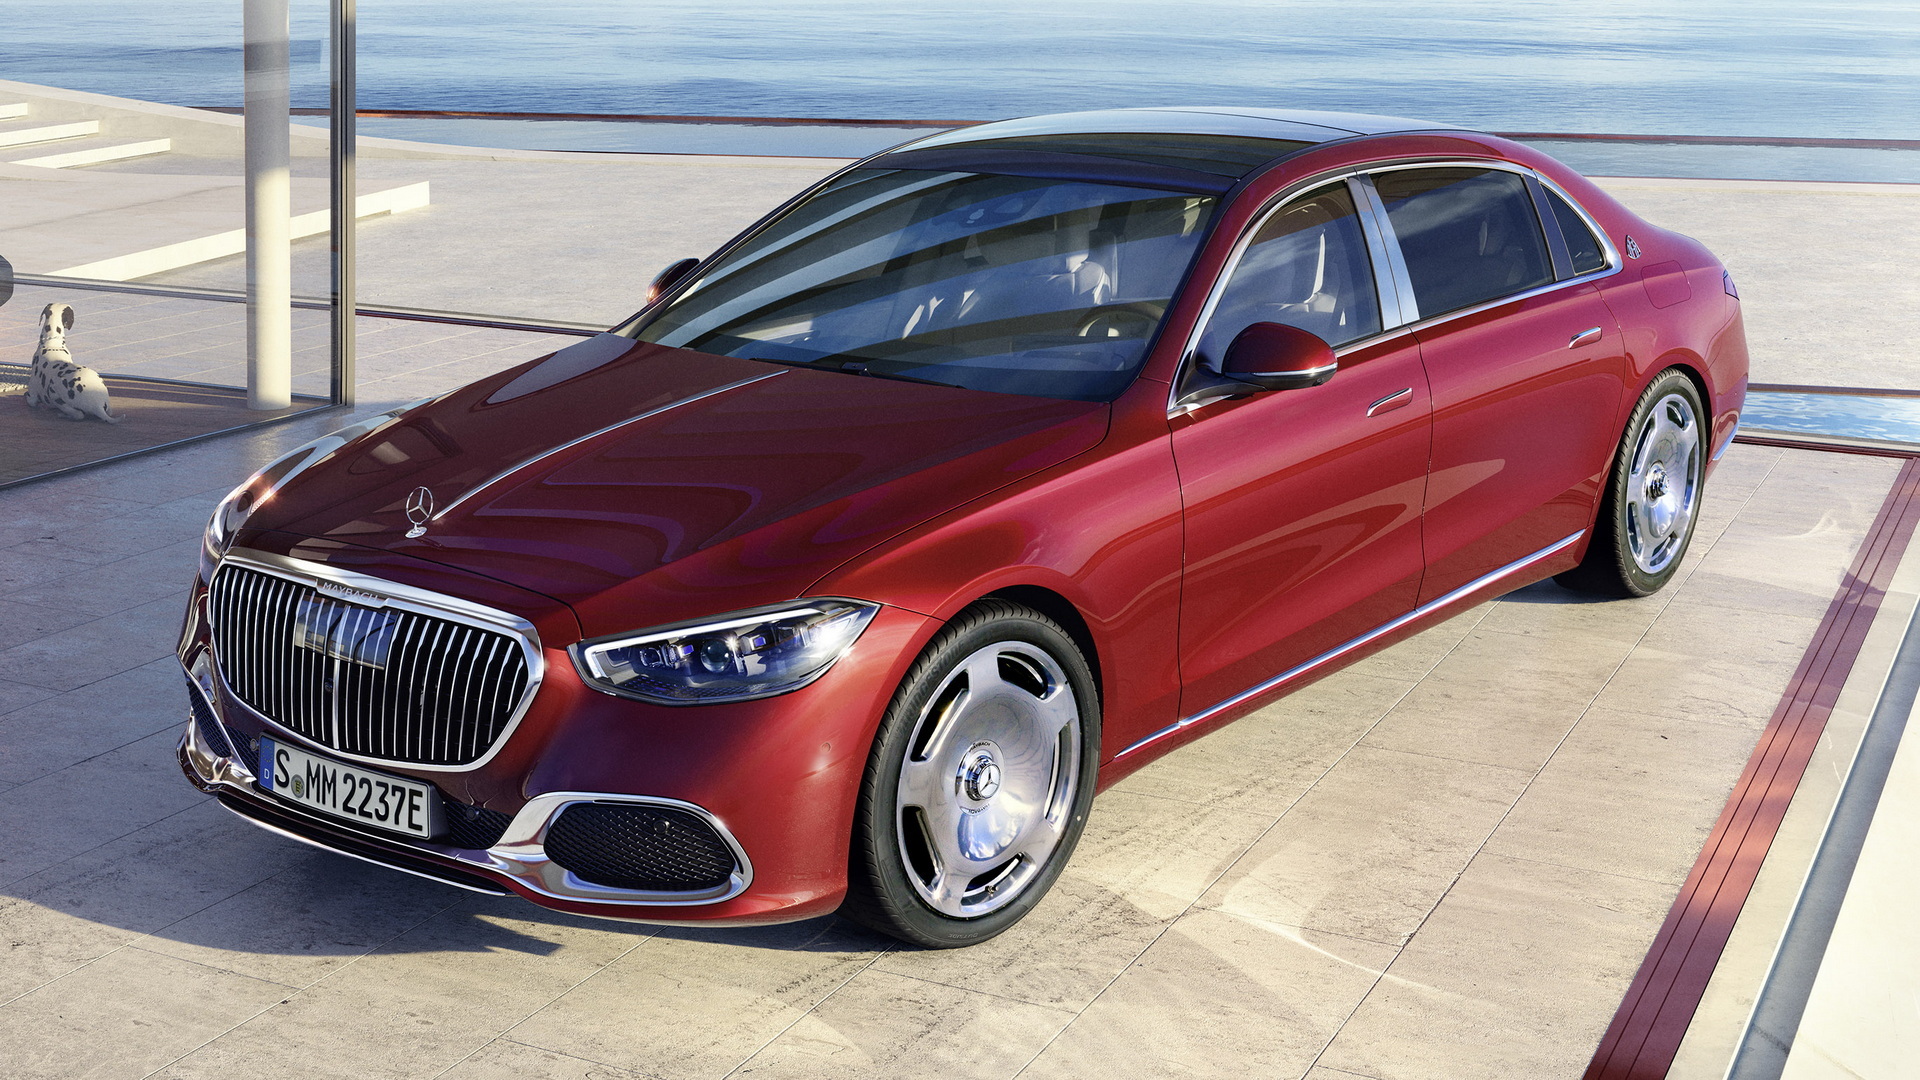 2022 Mercedes-Maybach S-Class by Virgil Abloh - Wallpapers and HD